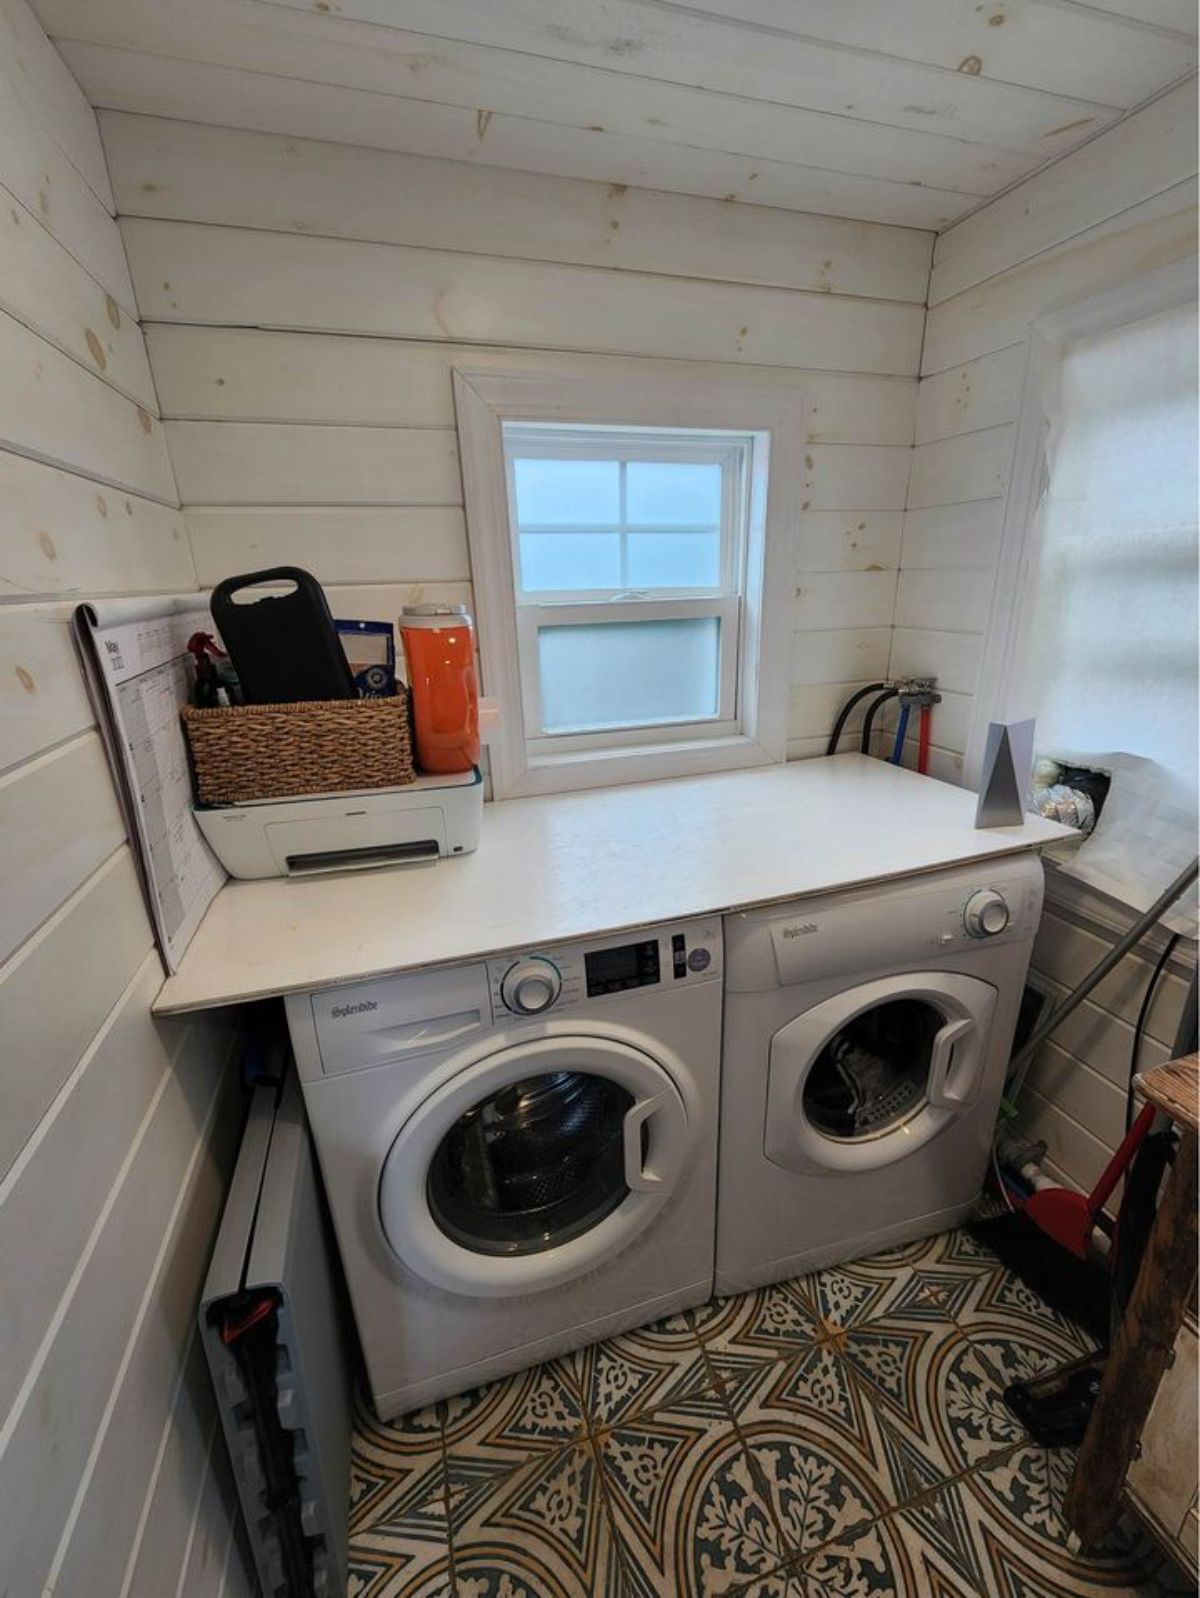 Bathroom area of 450 sf Tiny Home has a washer and dryer unit